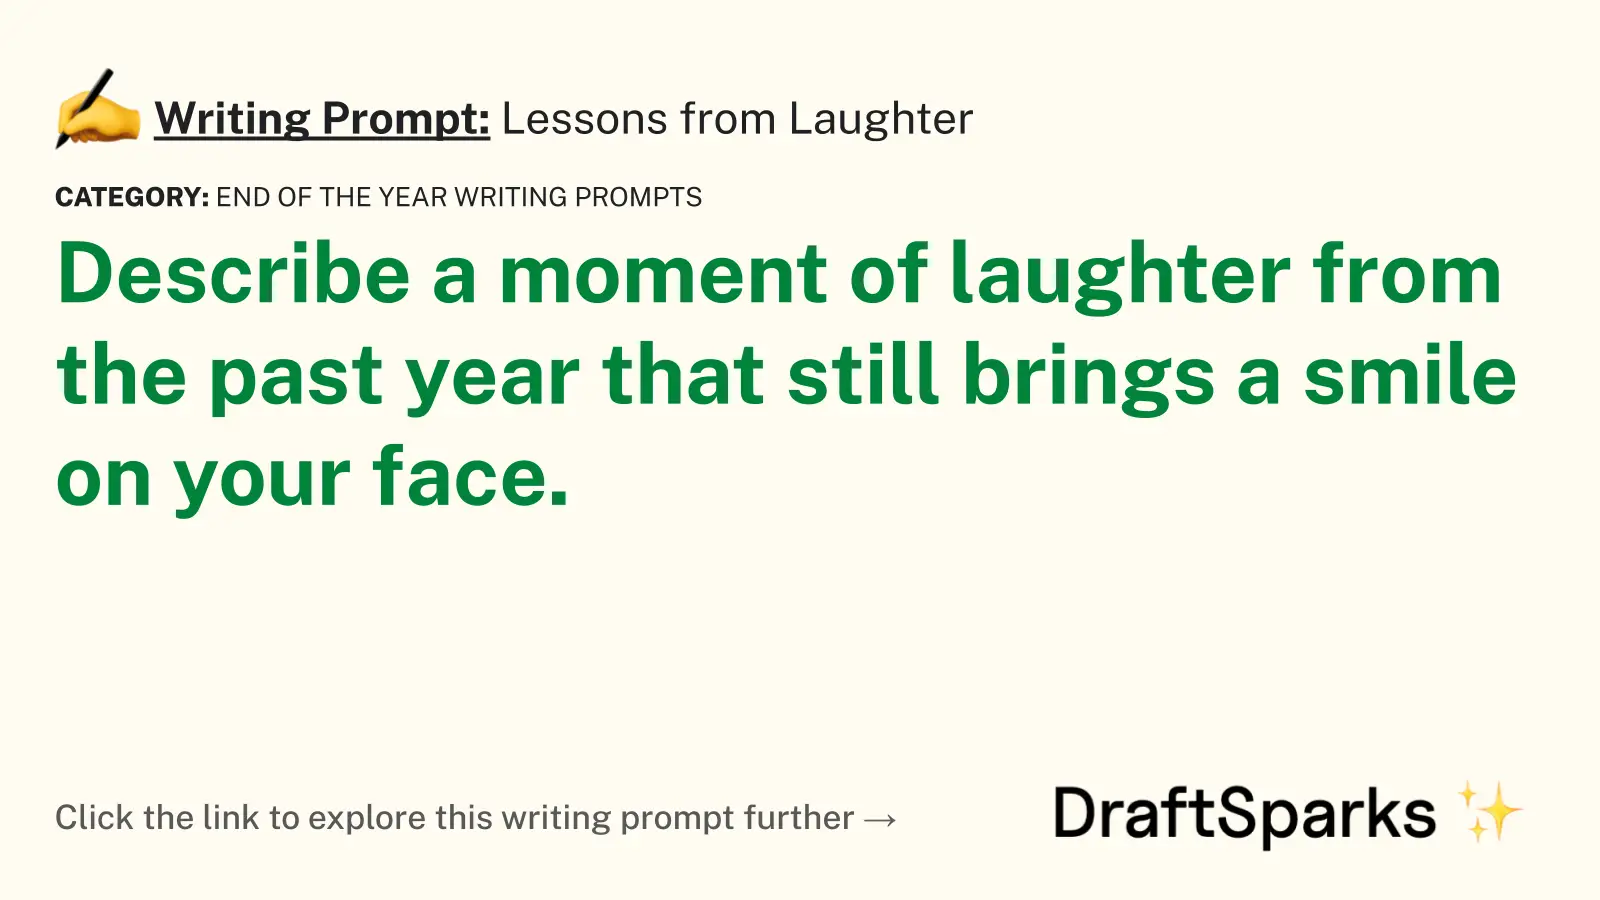 Lessons from Laughter